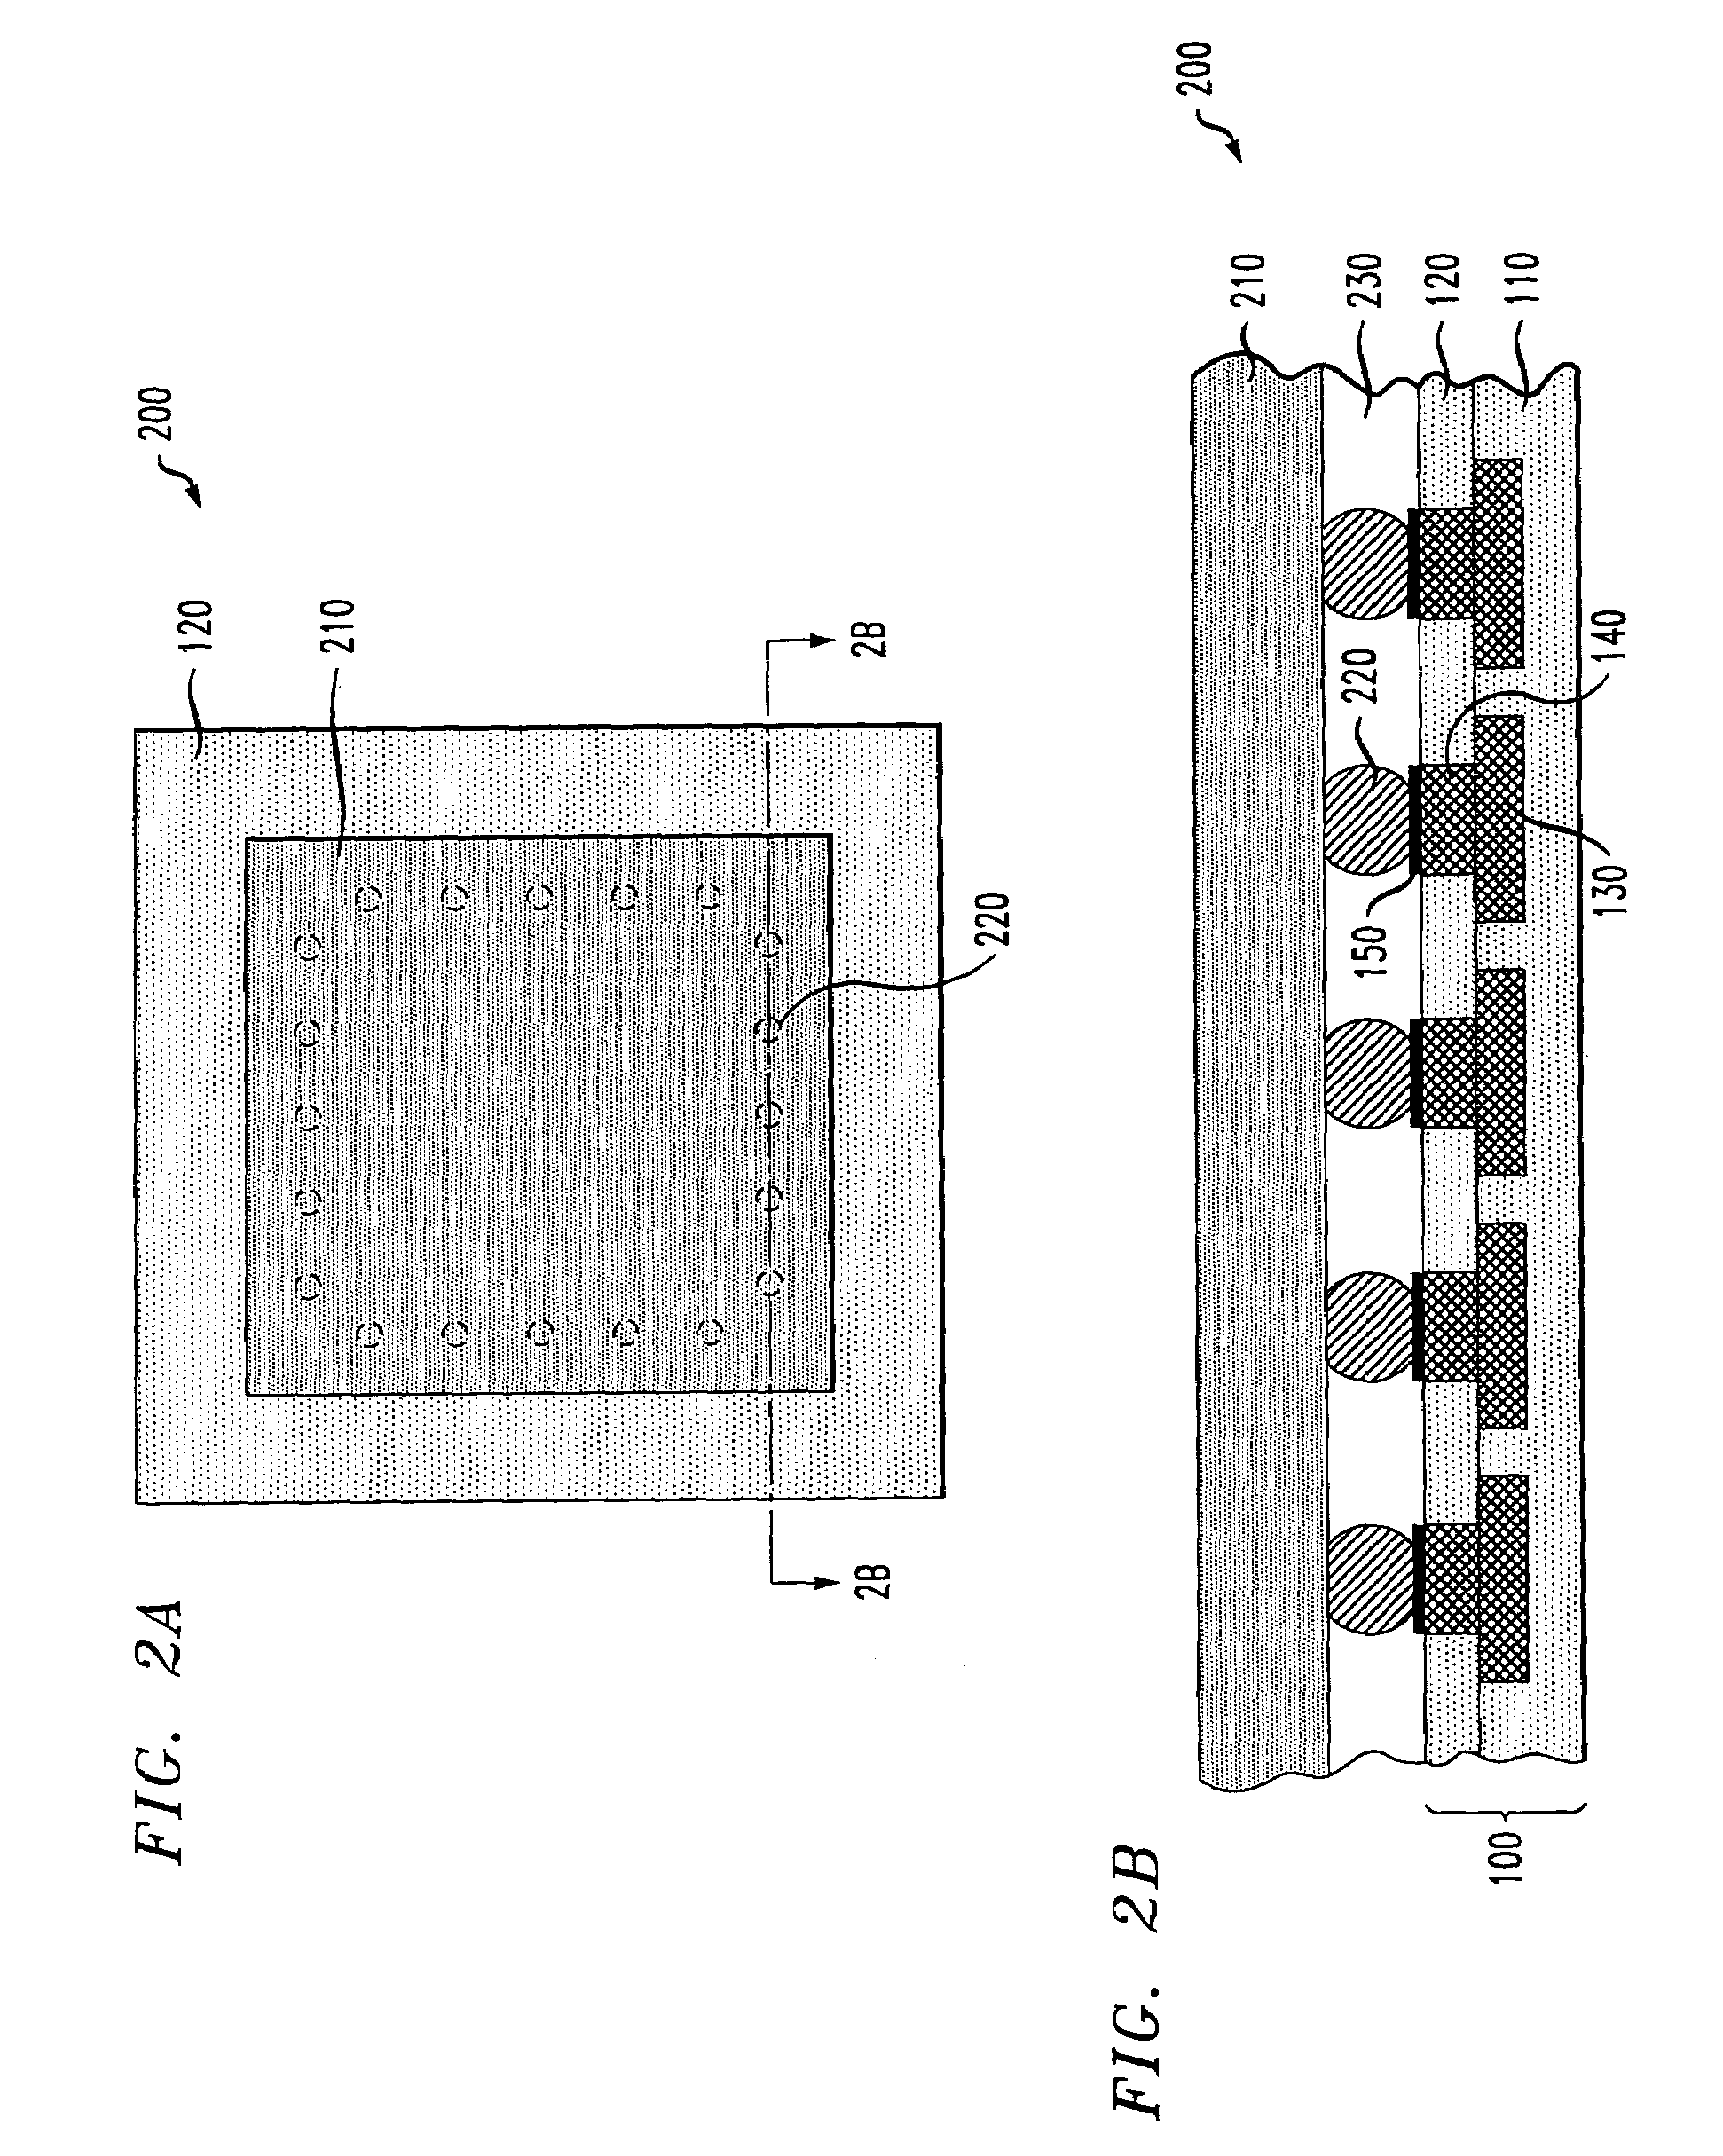 Flexible circuit substrate for flip-chip-on-flex applications